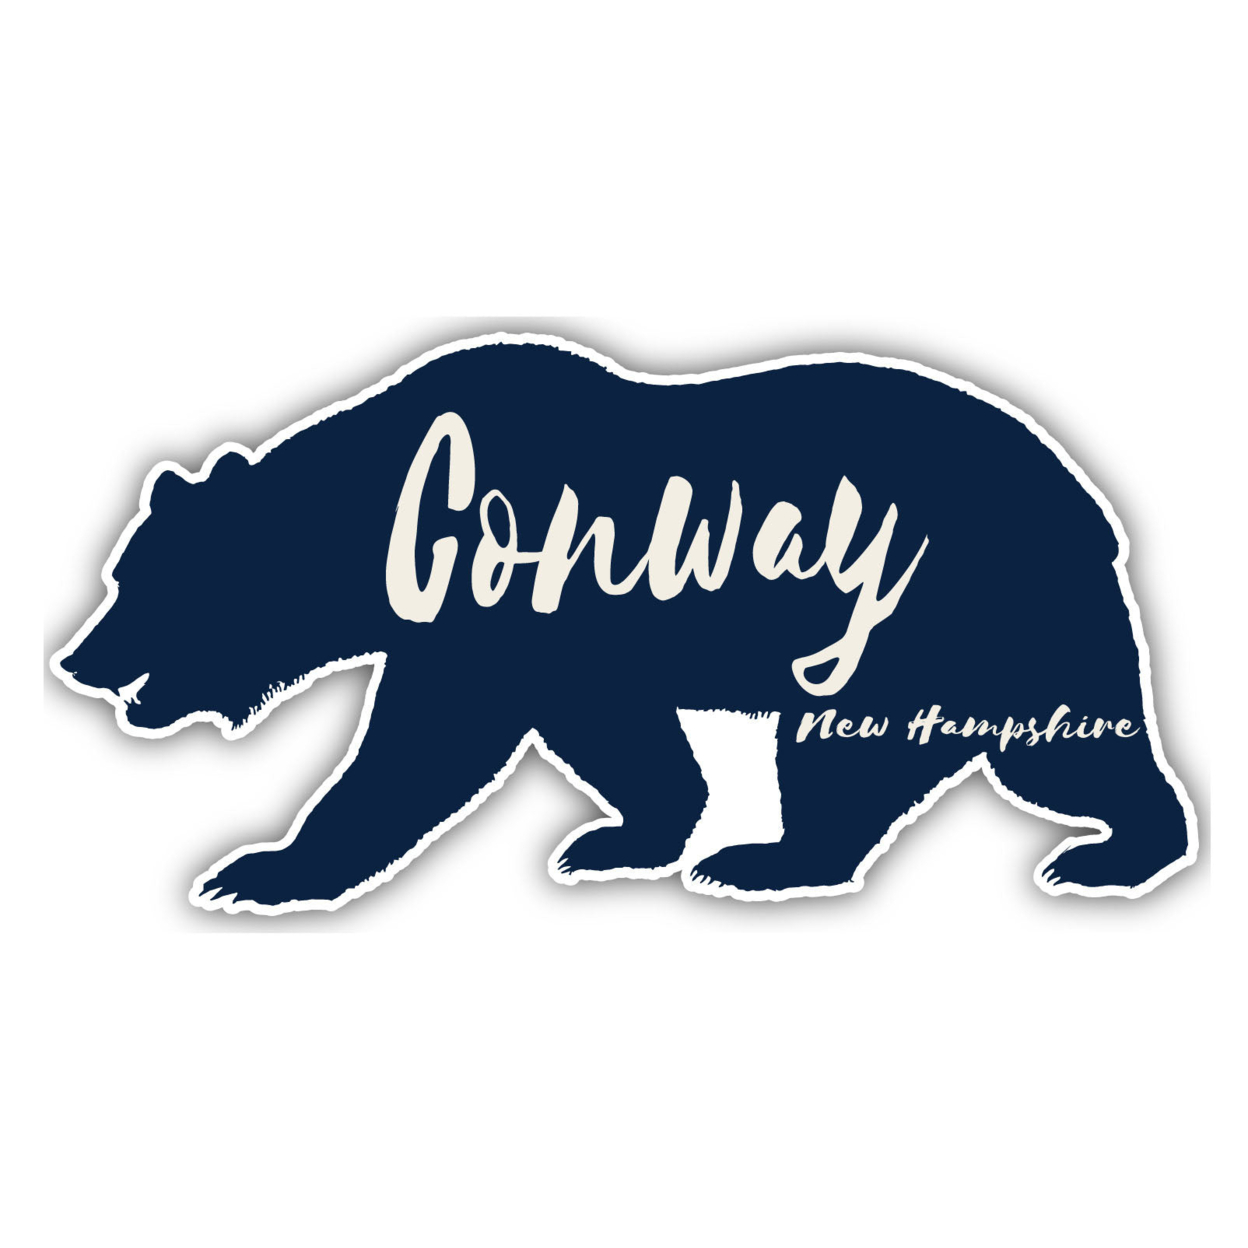 Conway New Hampshire Souvenir Decorative Stickers (Choose Theme And Size) - 4-Pack, 8-Inch, Bear